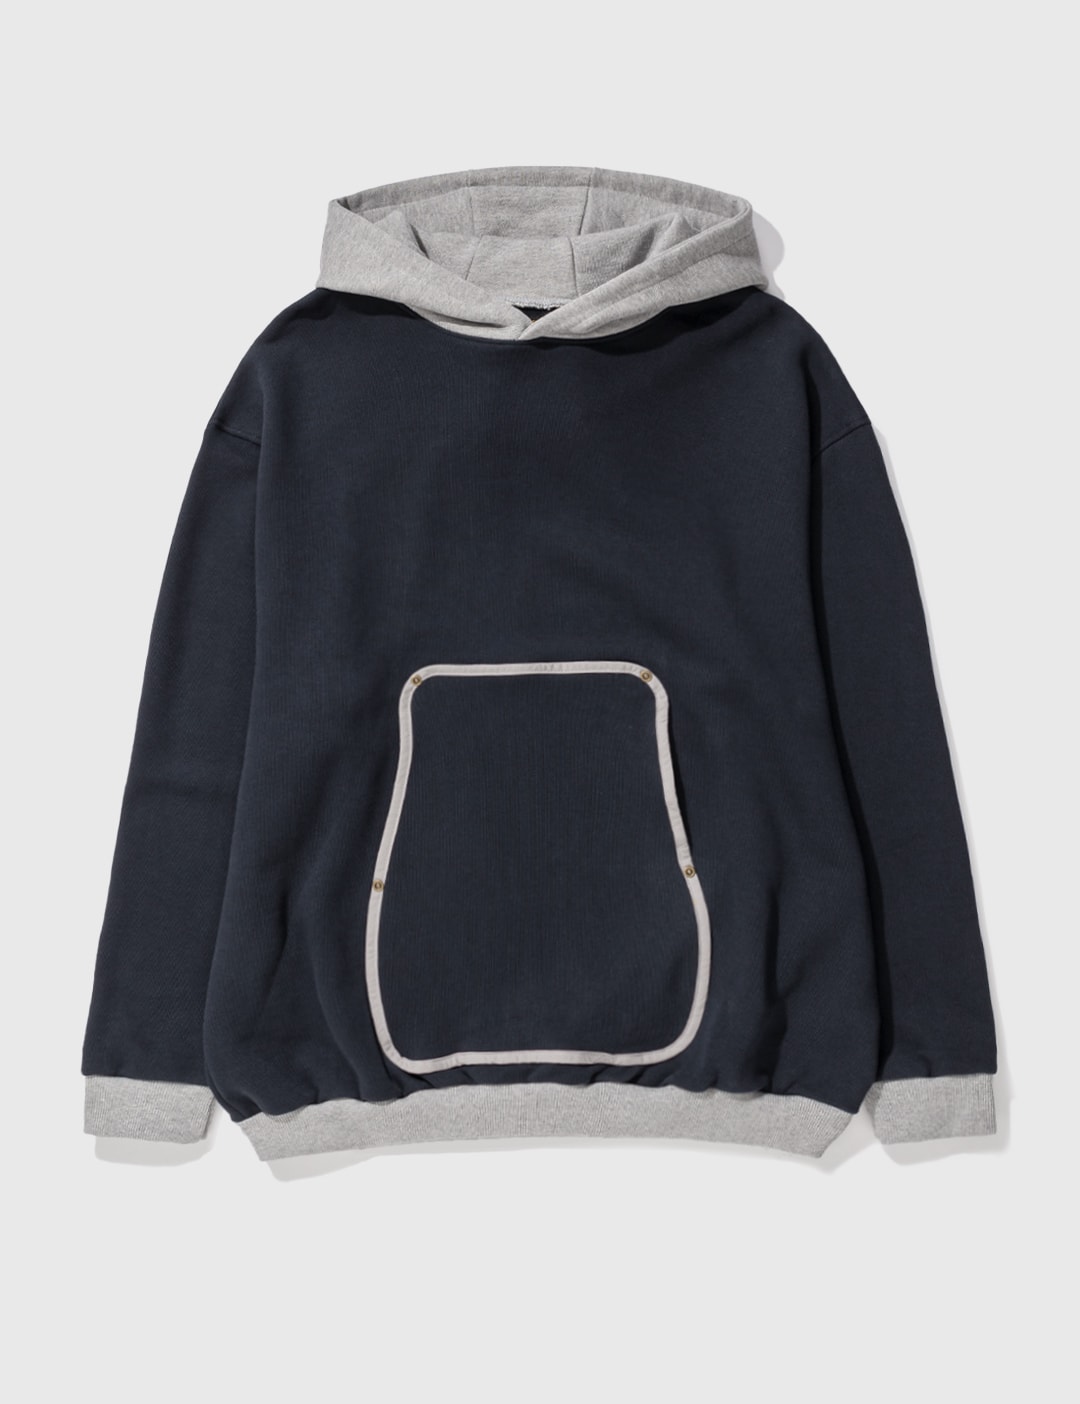 Darenimo - Rivet hoodie | HBX - Globally Curated Fashion and Lifestyle ...